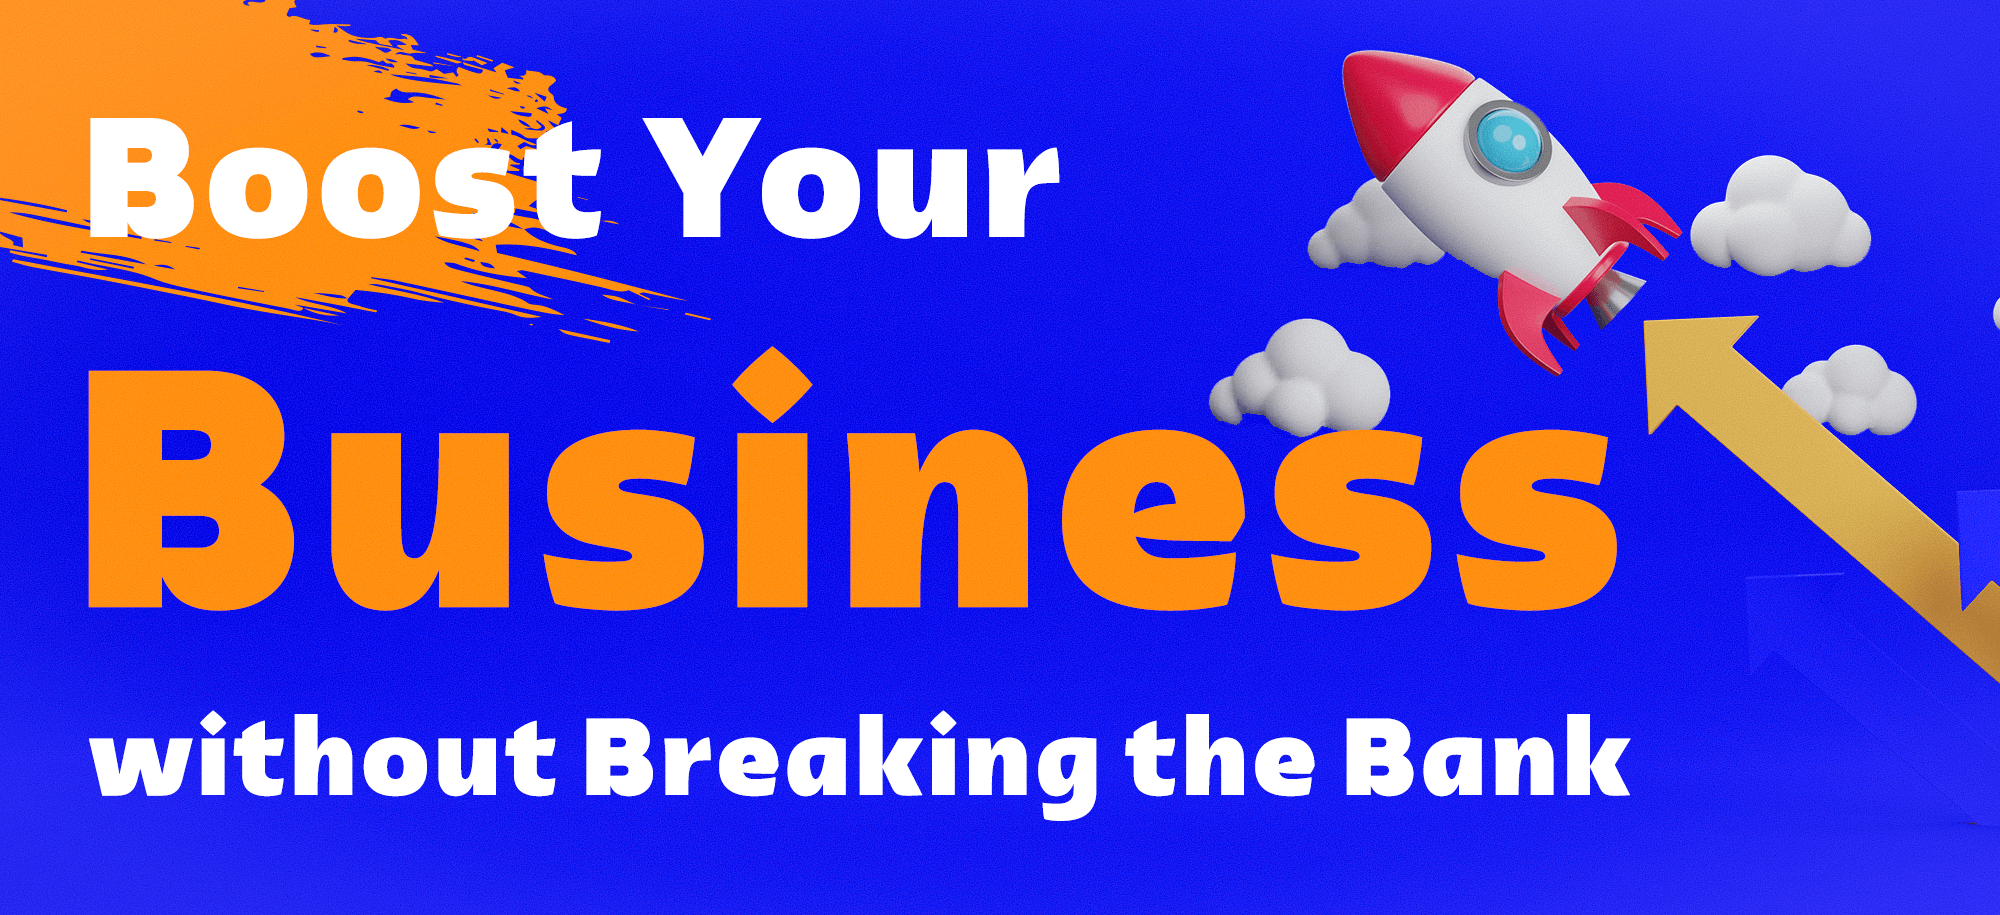 Boost Your Business without Breaking the Bank